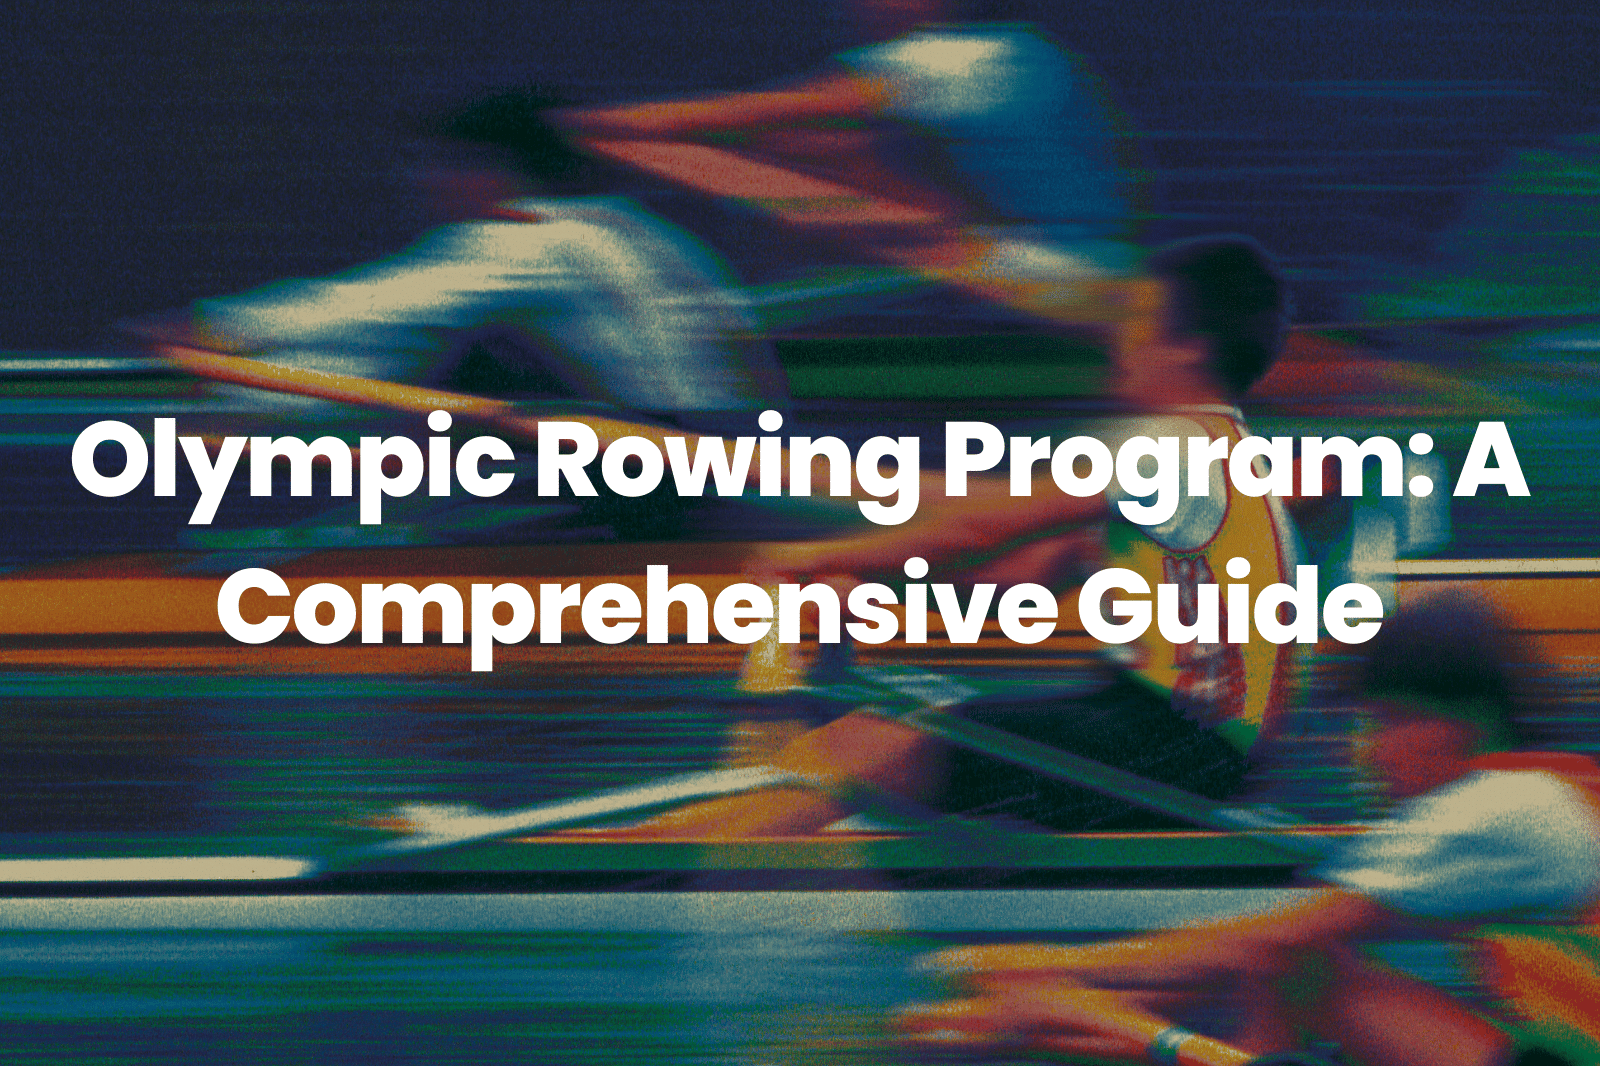 Olympic Rowing Program: A Comprehensive Guide